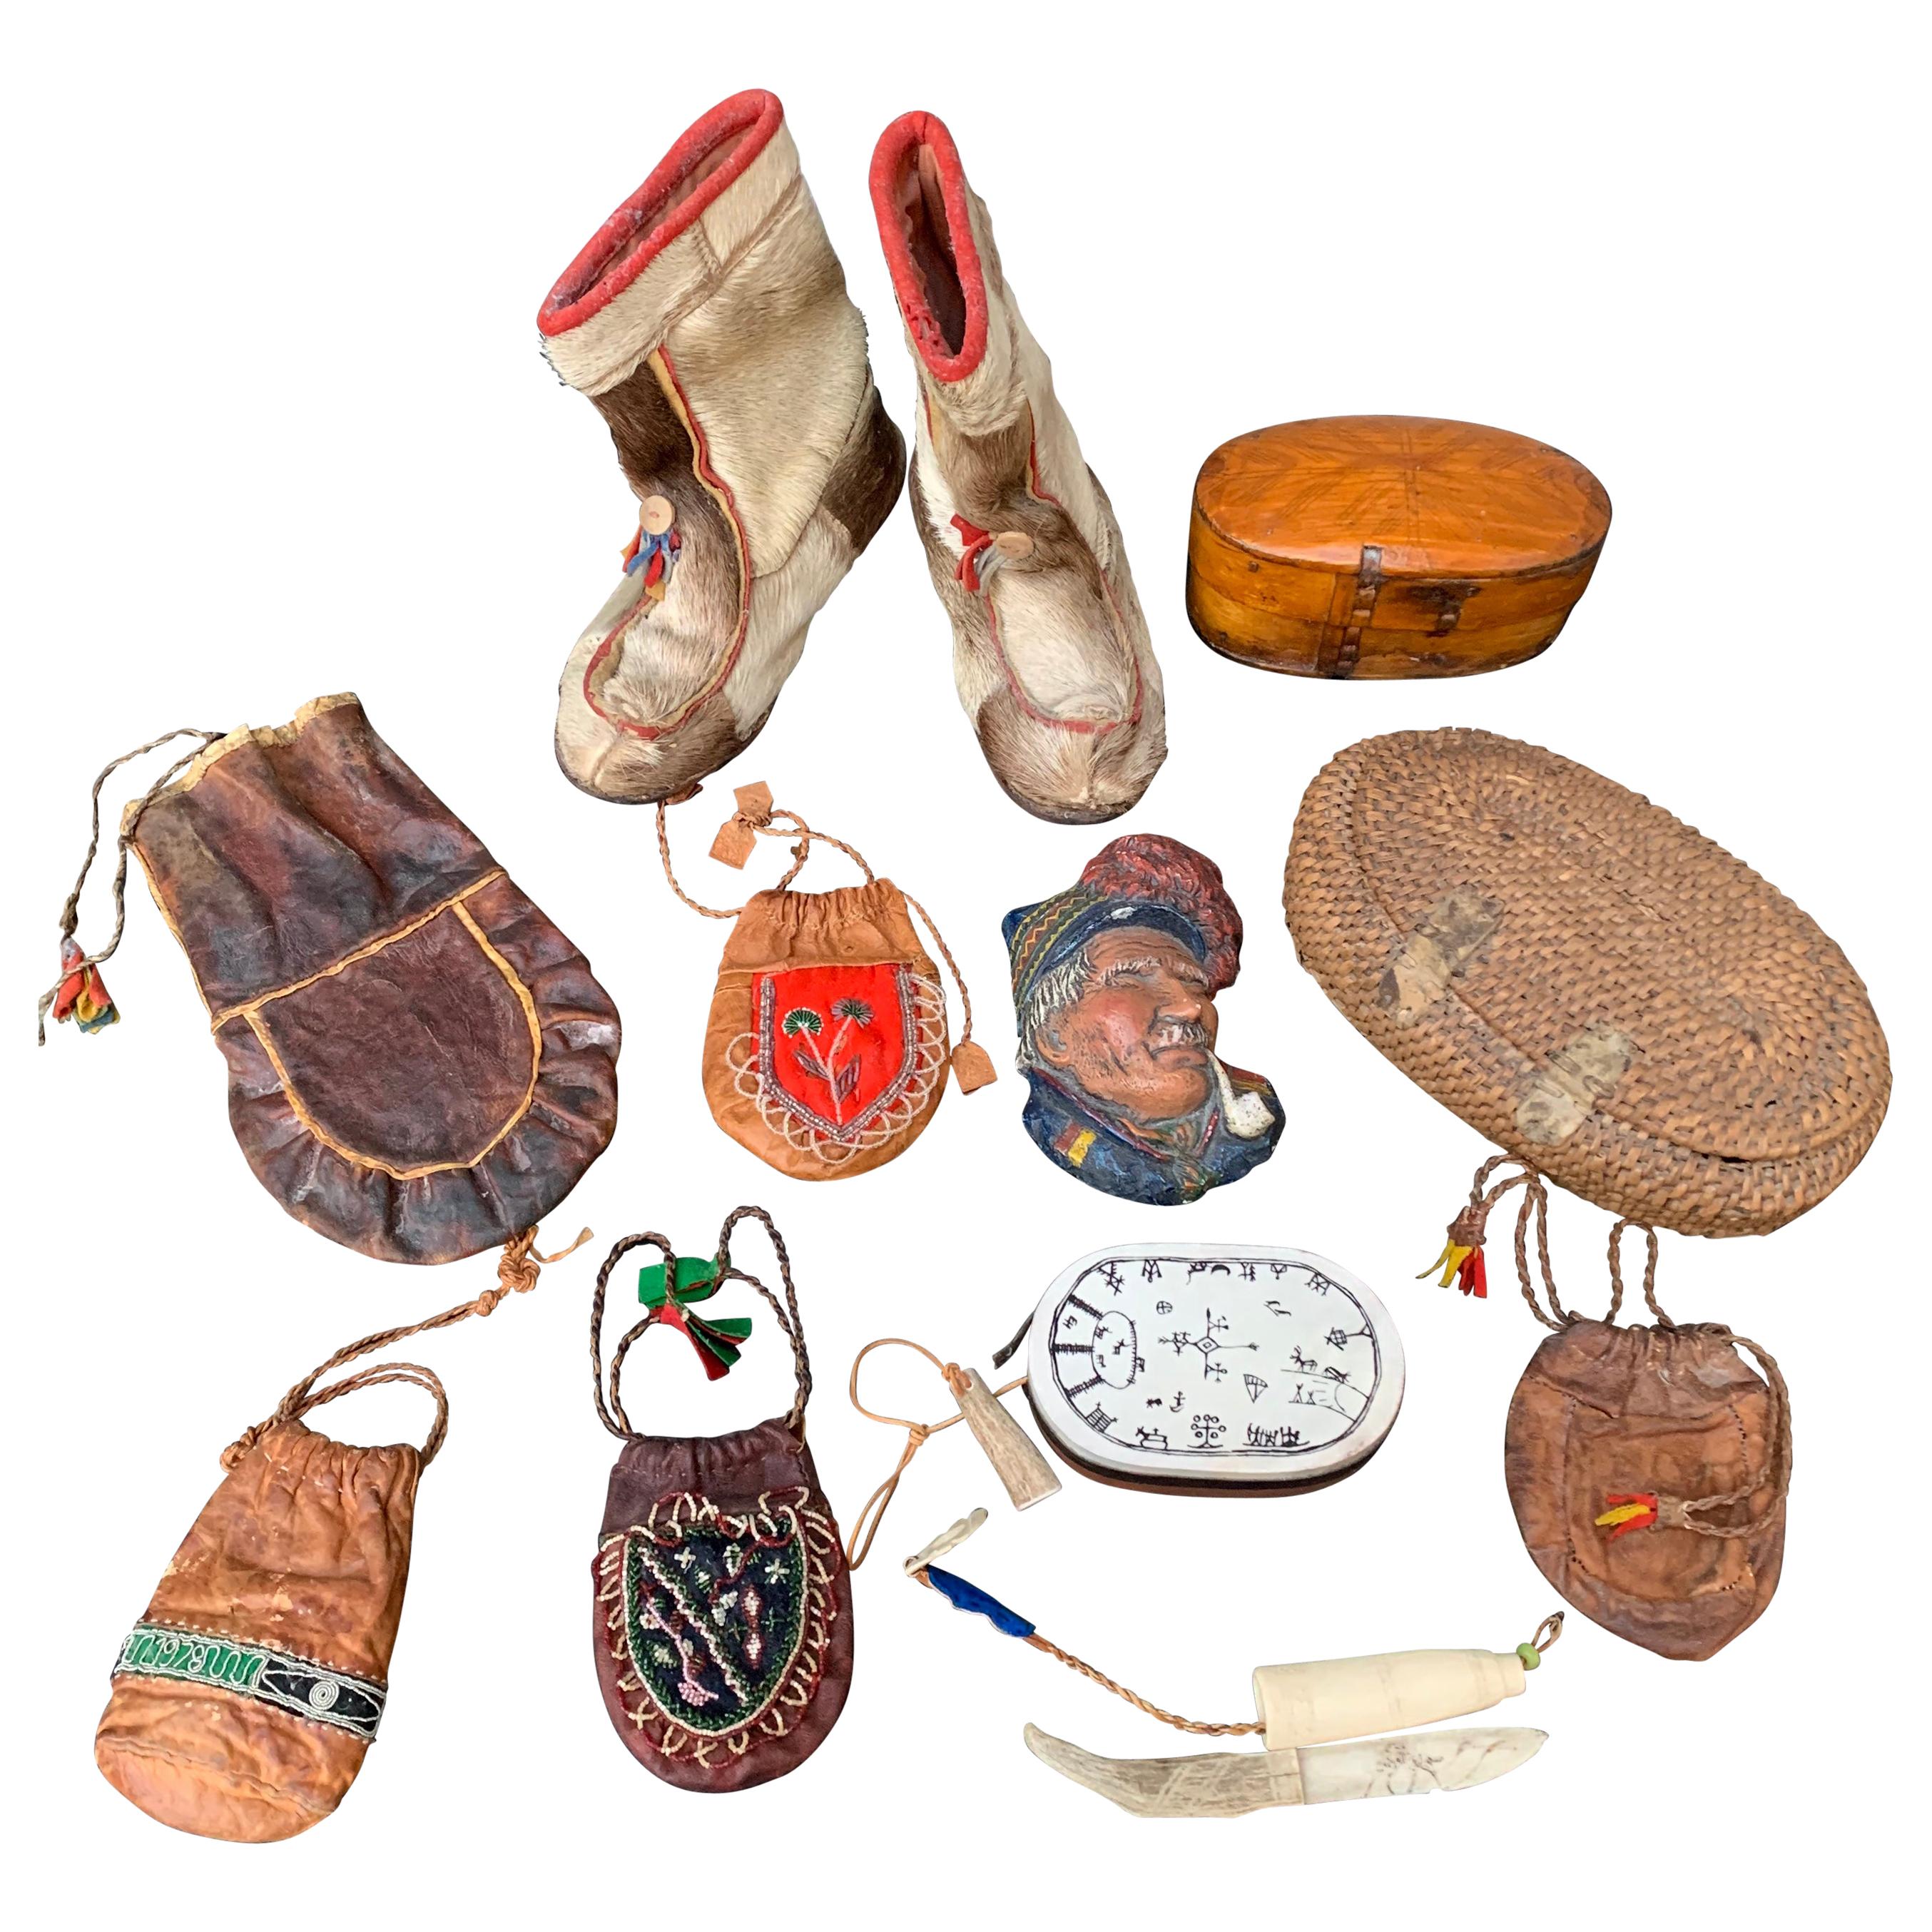 Swedish Collection of 11 Sami Folk Art Objects from Lappland